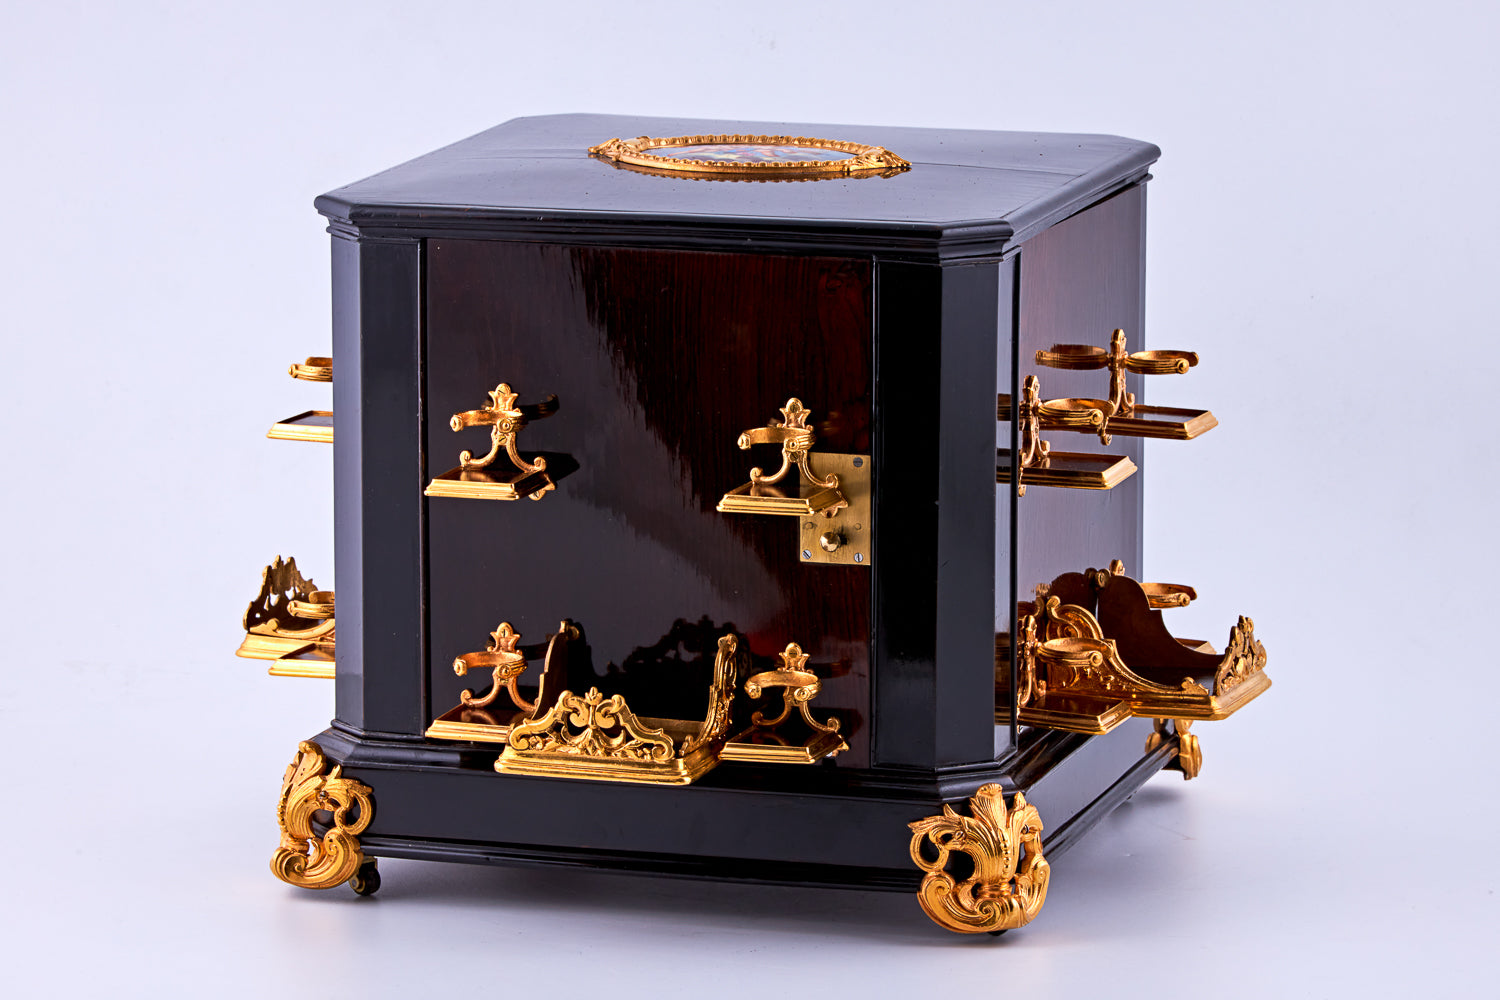 Napoleon III period ebony cabinet with Sèvres Porcelain plaques and ormolu mounts